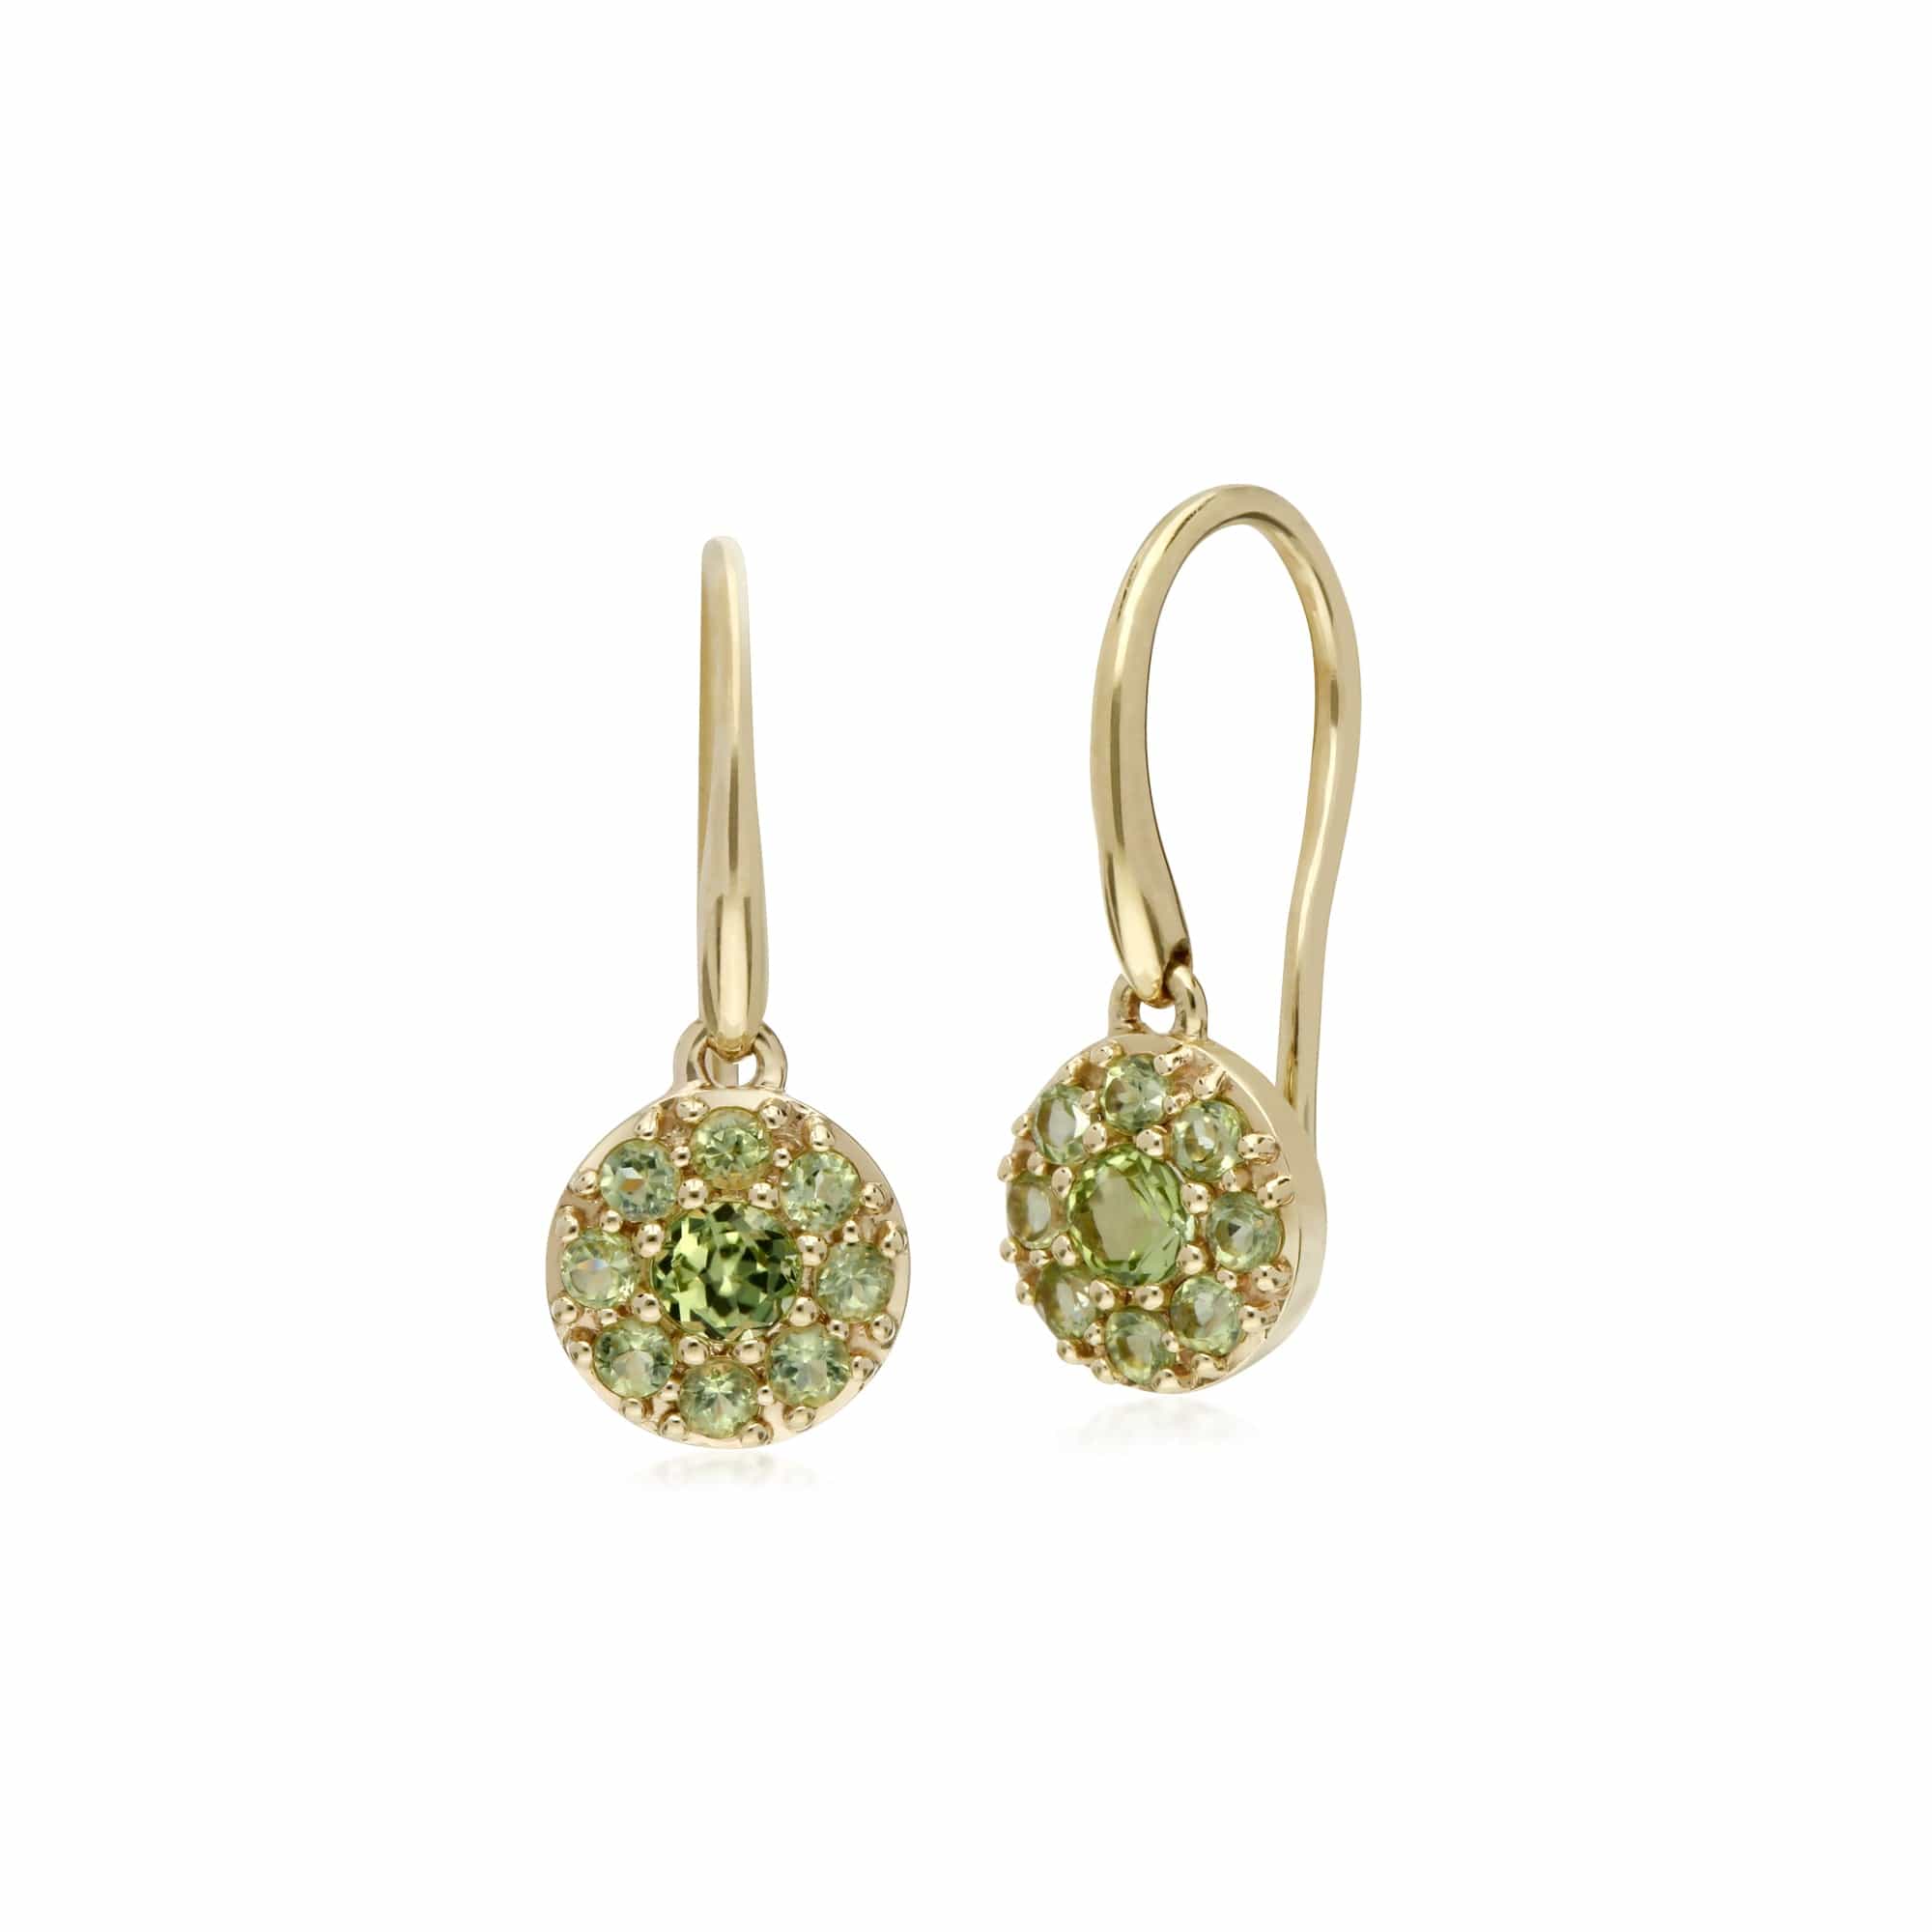 135E1573079-135P1910079 Classic Round Peridot Cluster Drop Earrings & Pendant Set in 9ct Yellow Gold 2